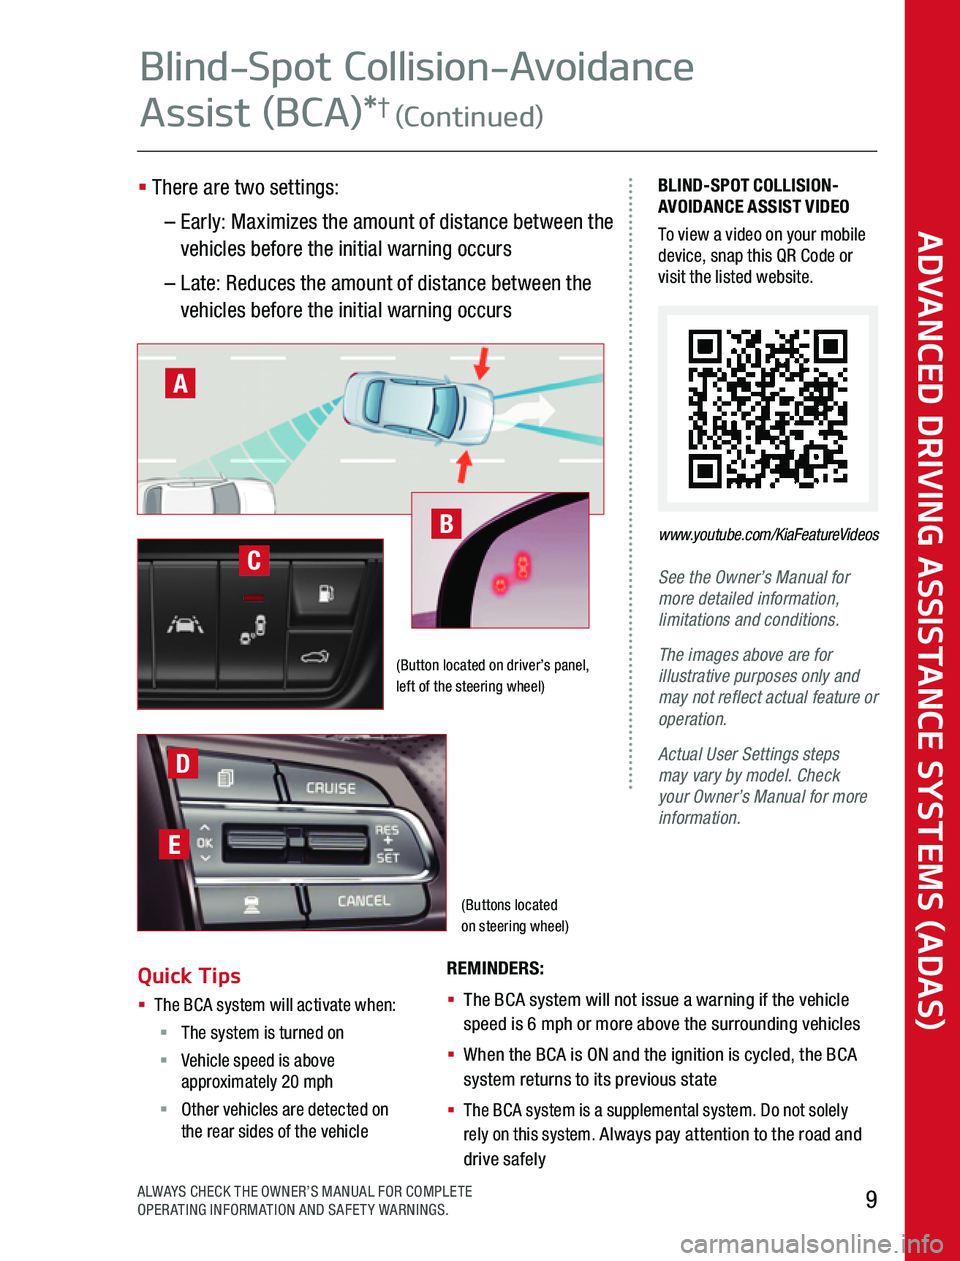 KIA SEDONA 2020  Advanced Driving Assistance System (Buttons located  on steering wheel)
BLIND-SPOT COLLISION-AVOIDANCE ASSIST VIDEOTo view a video on your mobile device, snap this QR Code or visit the listed website  
See the Owner’s Manual for more